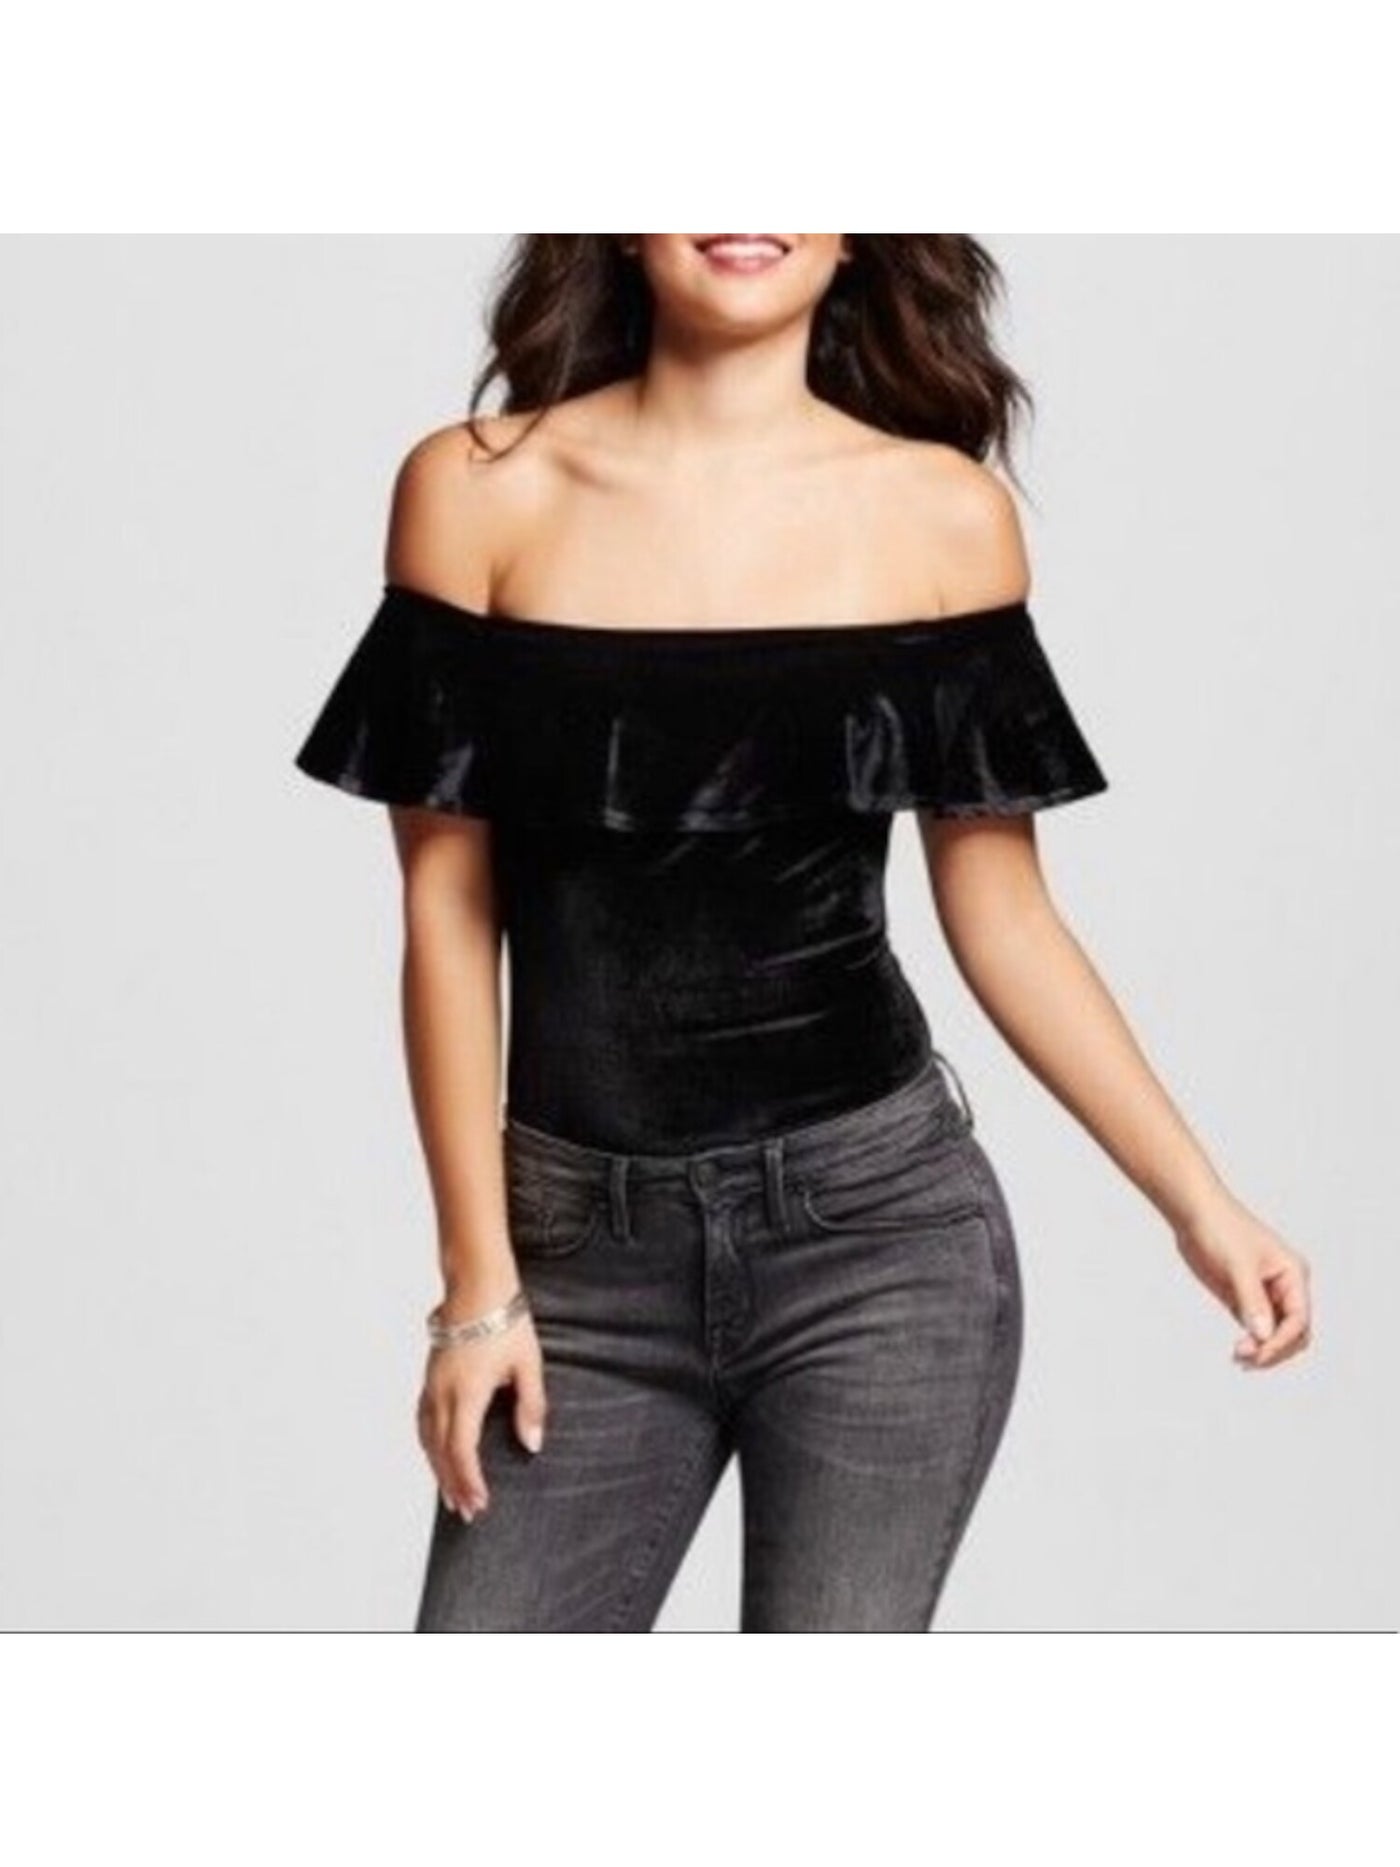 MAISIE Womens Stretch Ruffled Velvet Snap-closure Flutter Sleeve Off Shoulder Party Body Suit Top